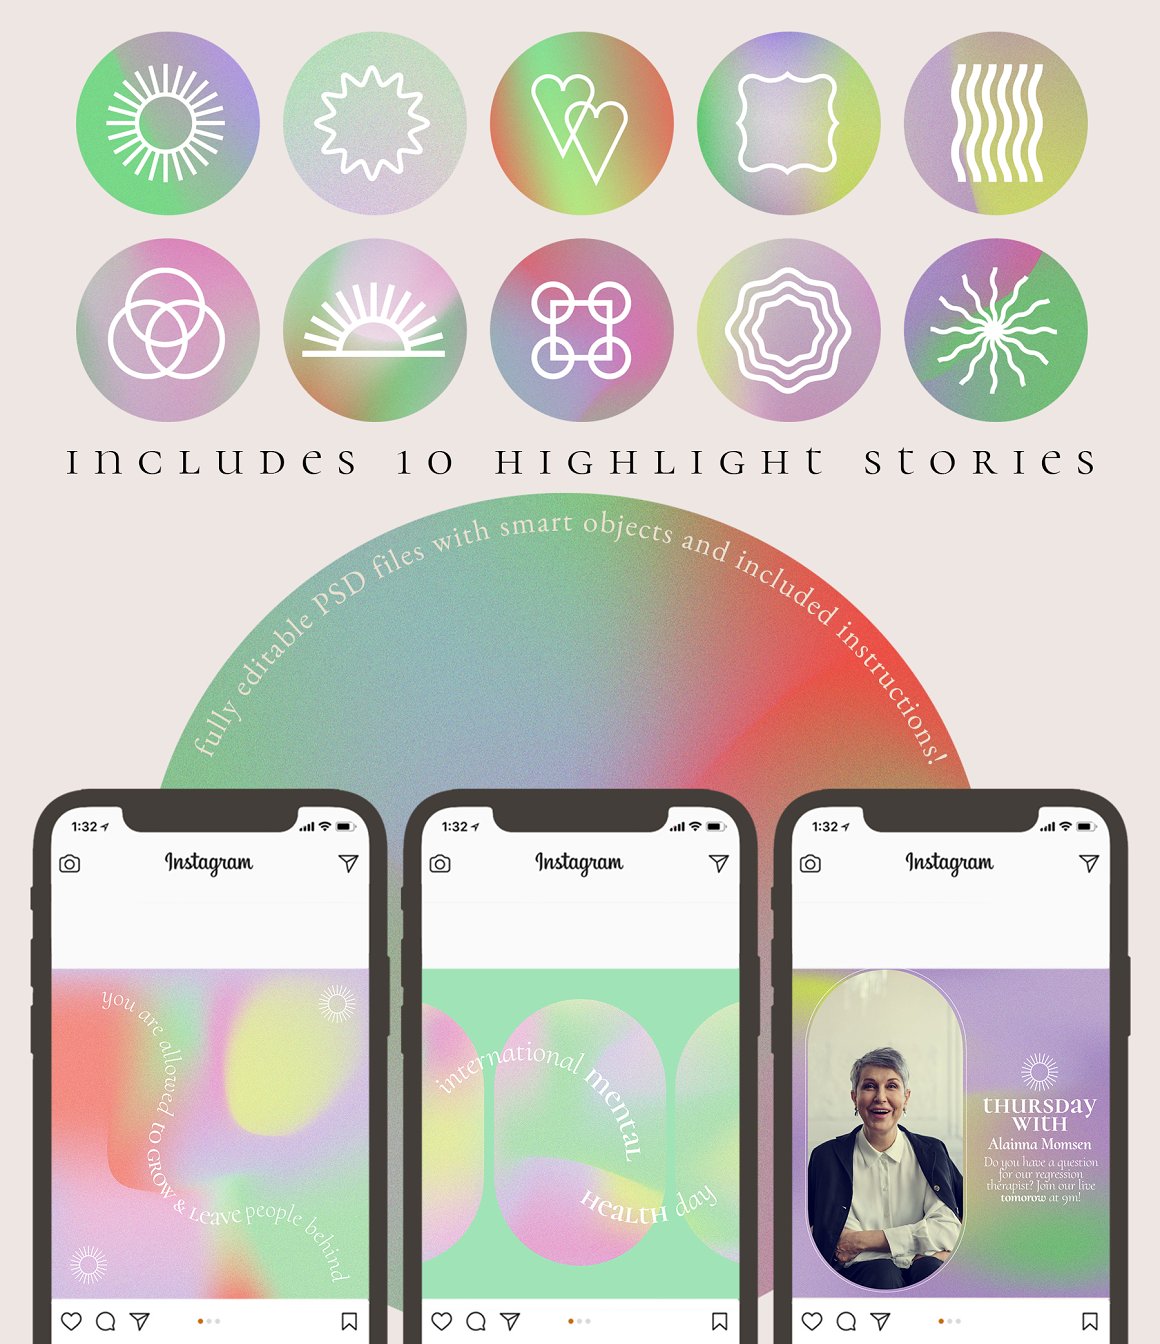 3 iphone mockups with posts and 10 highlights stories templates.